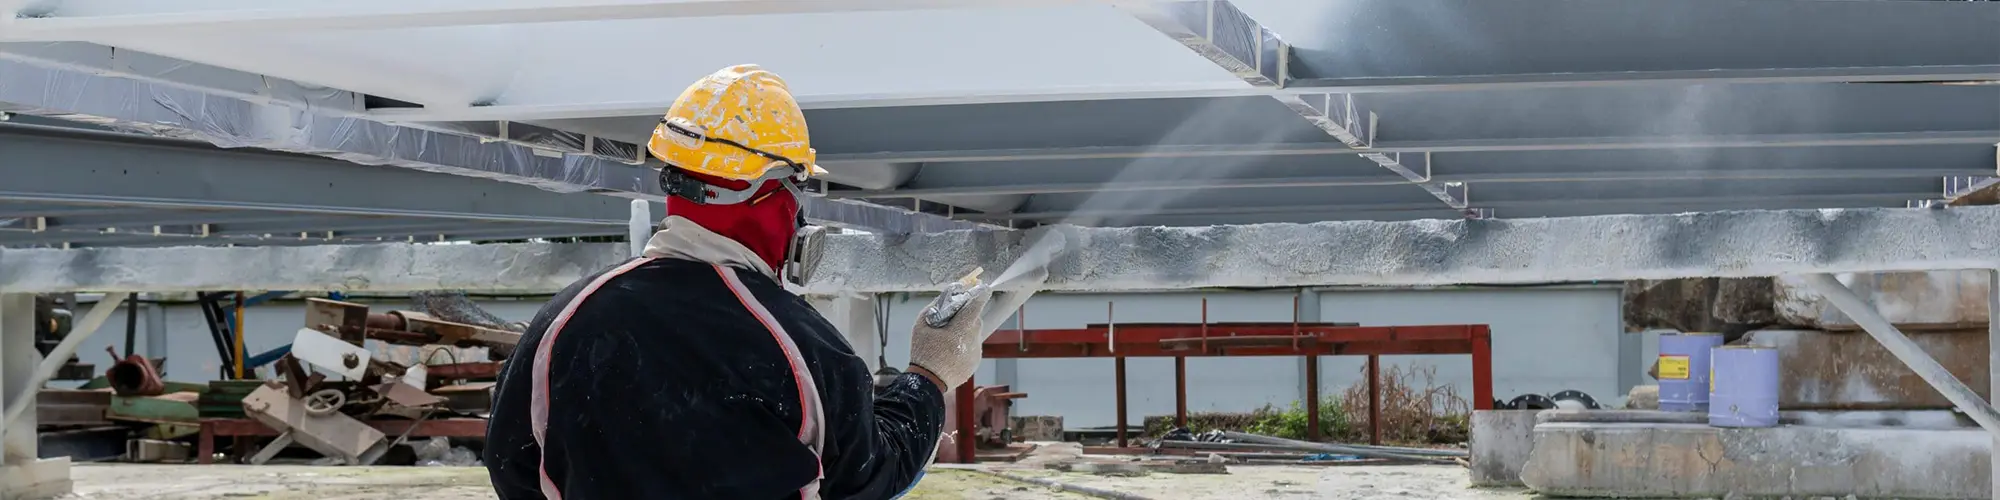 fireproofing a commercial building